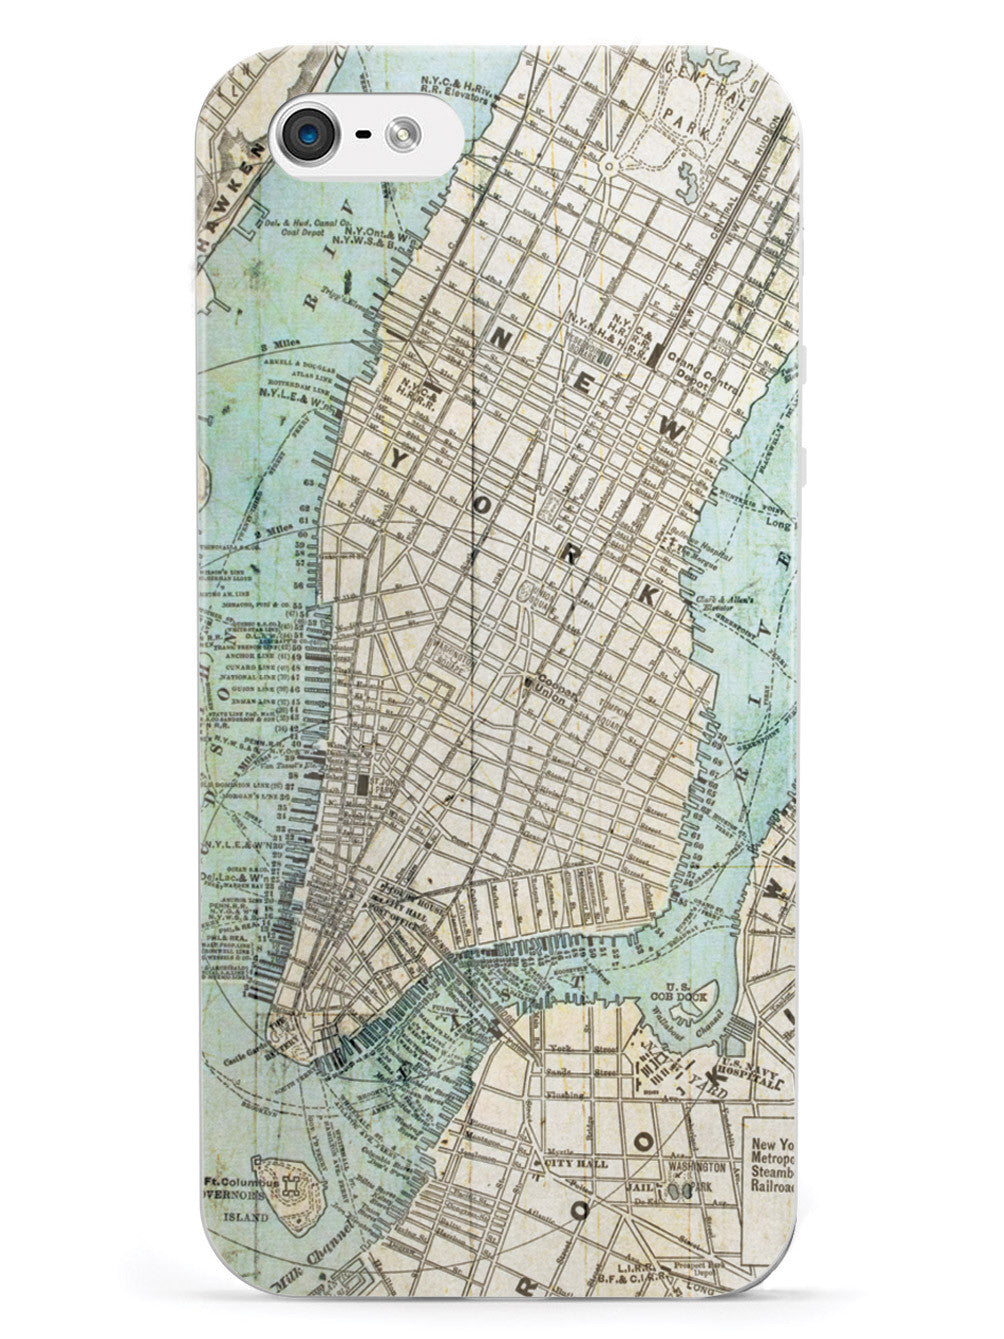 Old Street Map of New York Case